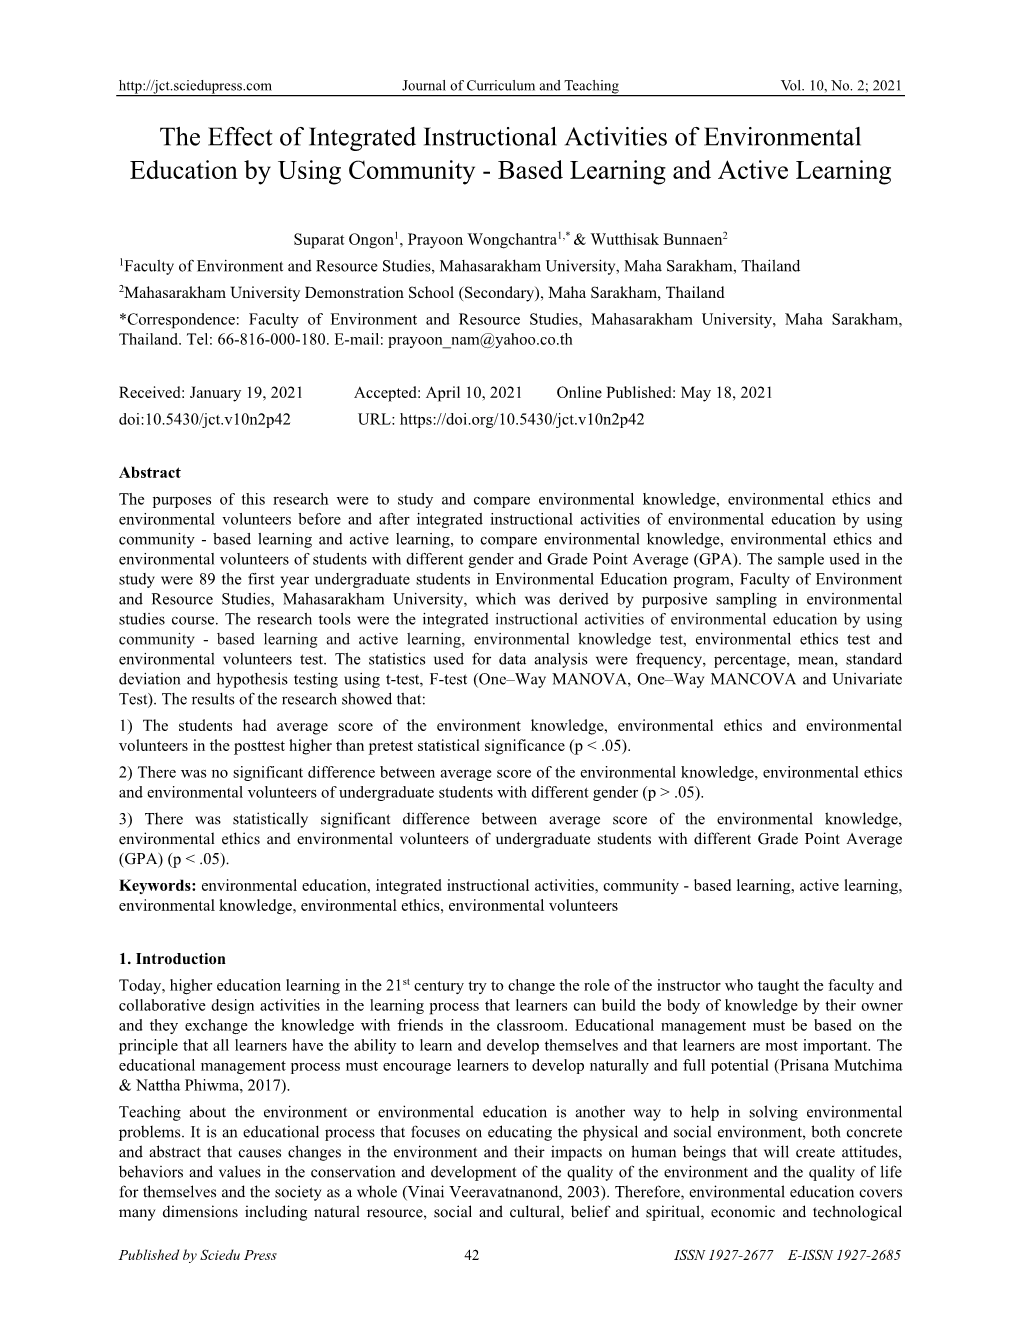 The Effect of Integrated Instructional Activities of Environmental Education by Using Community - Based Learning and Active Learning